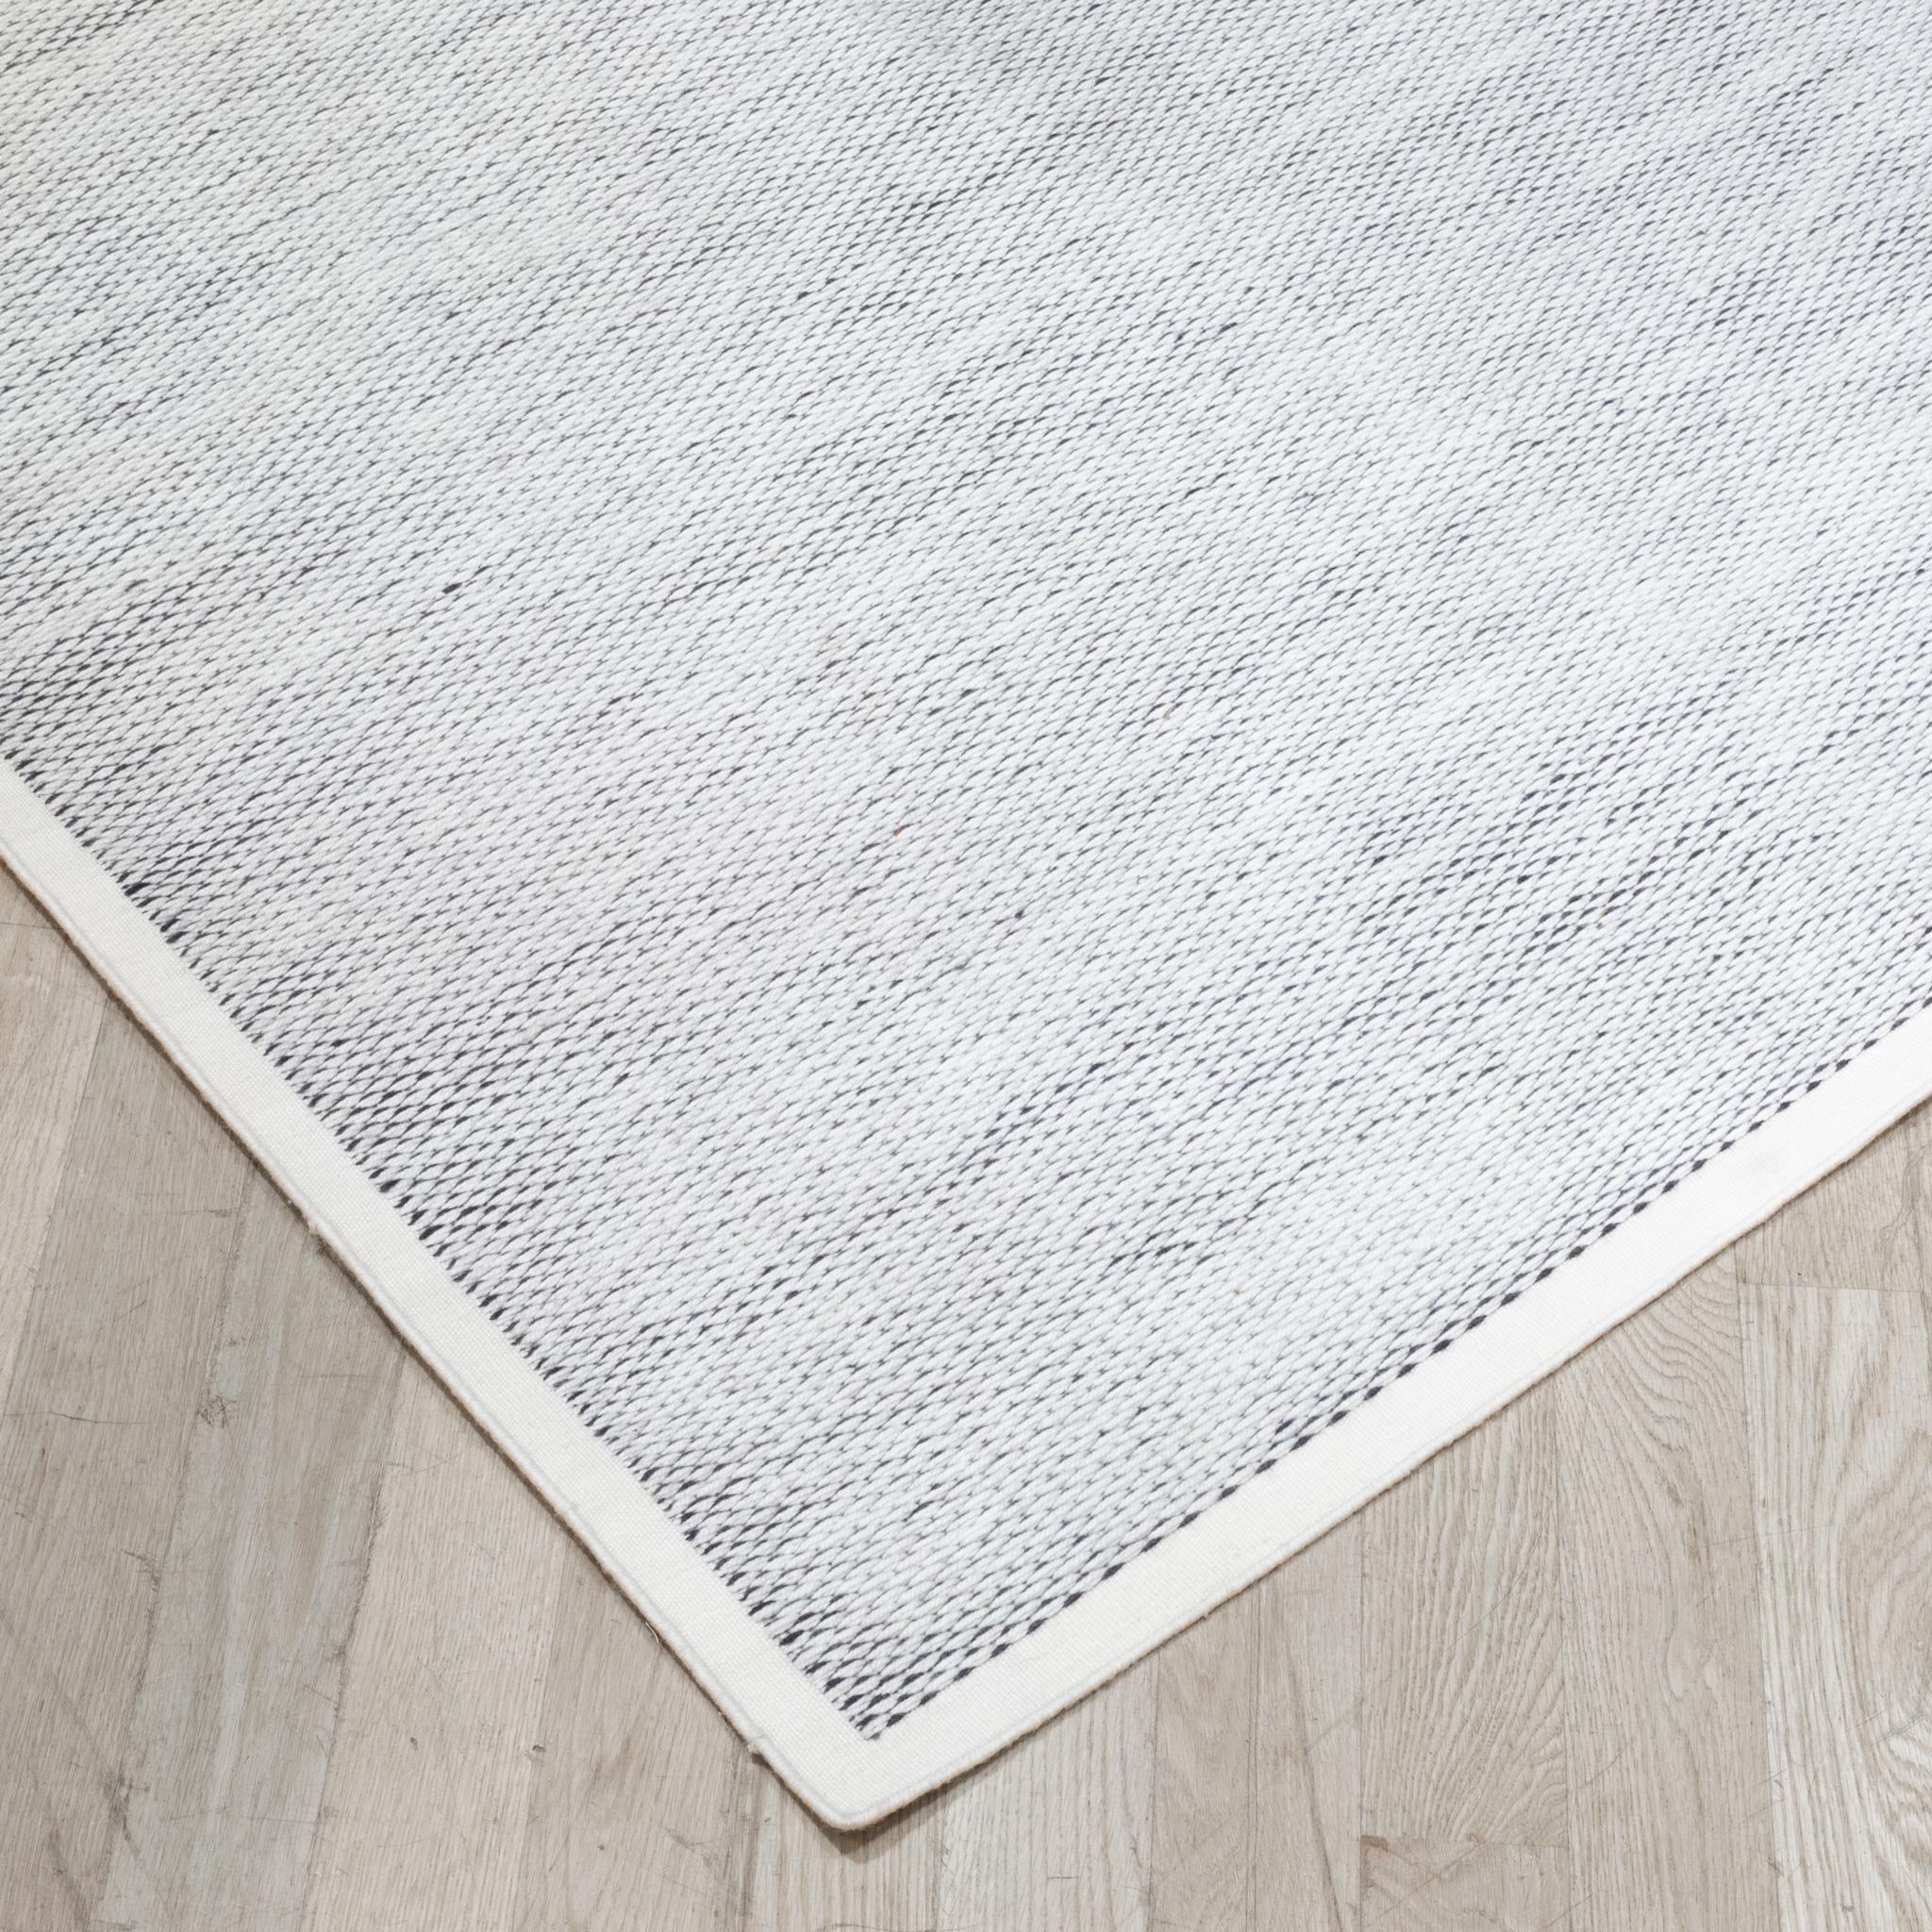 Modern 100% Merino Wool Lyxx Area Rug by Fells Andes 5' x 7' (FREE SHIPPING) For Sale